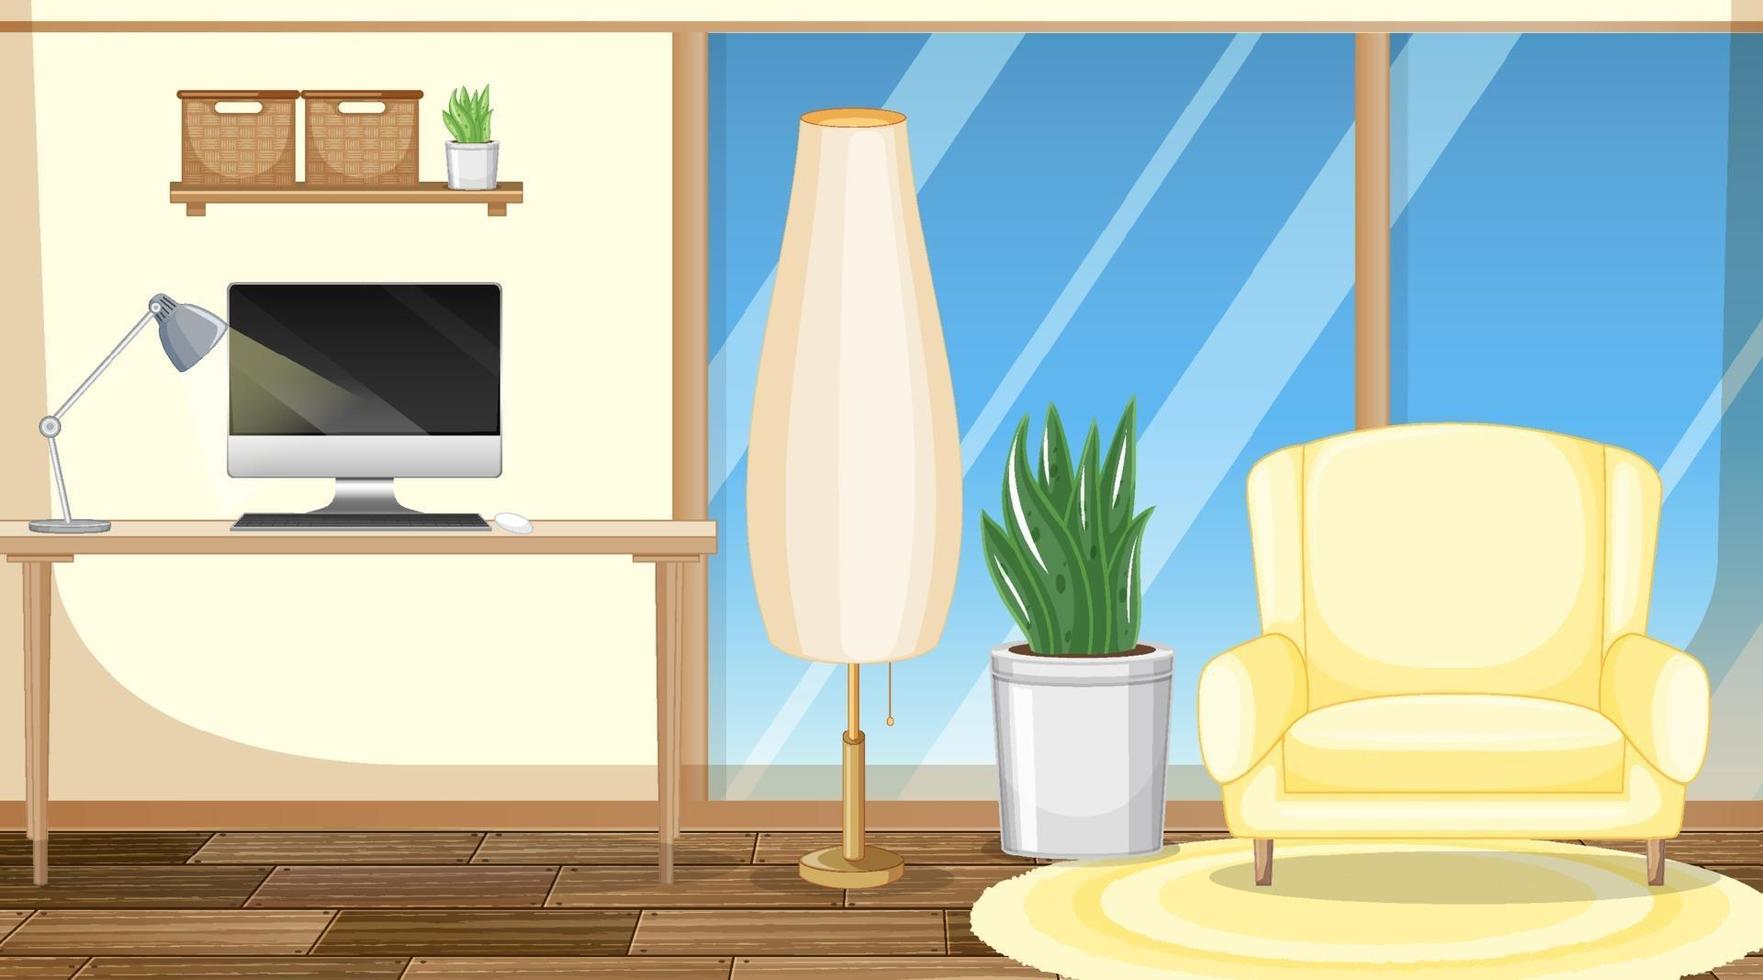 Living room interior design with furniture vector